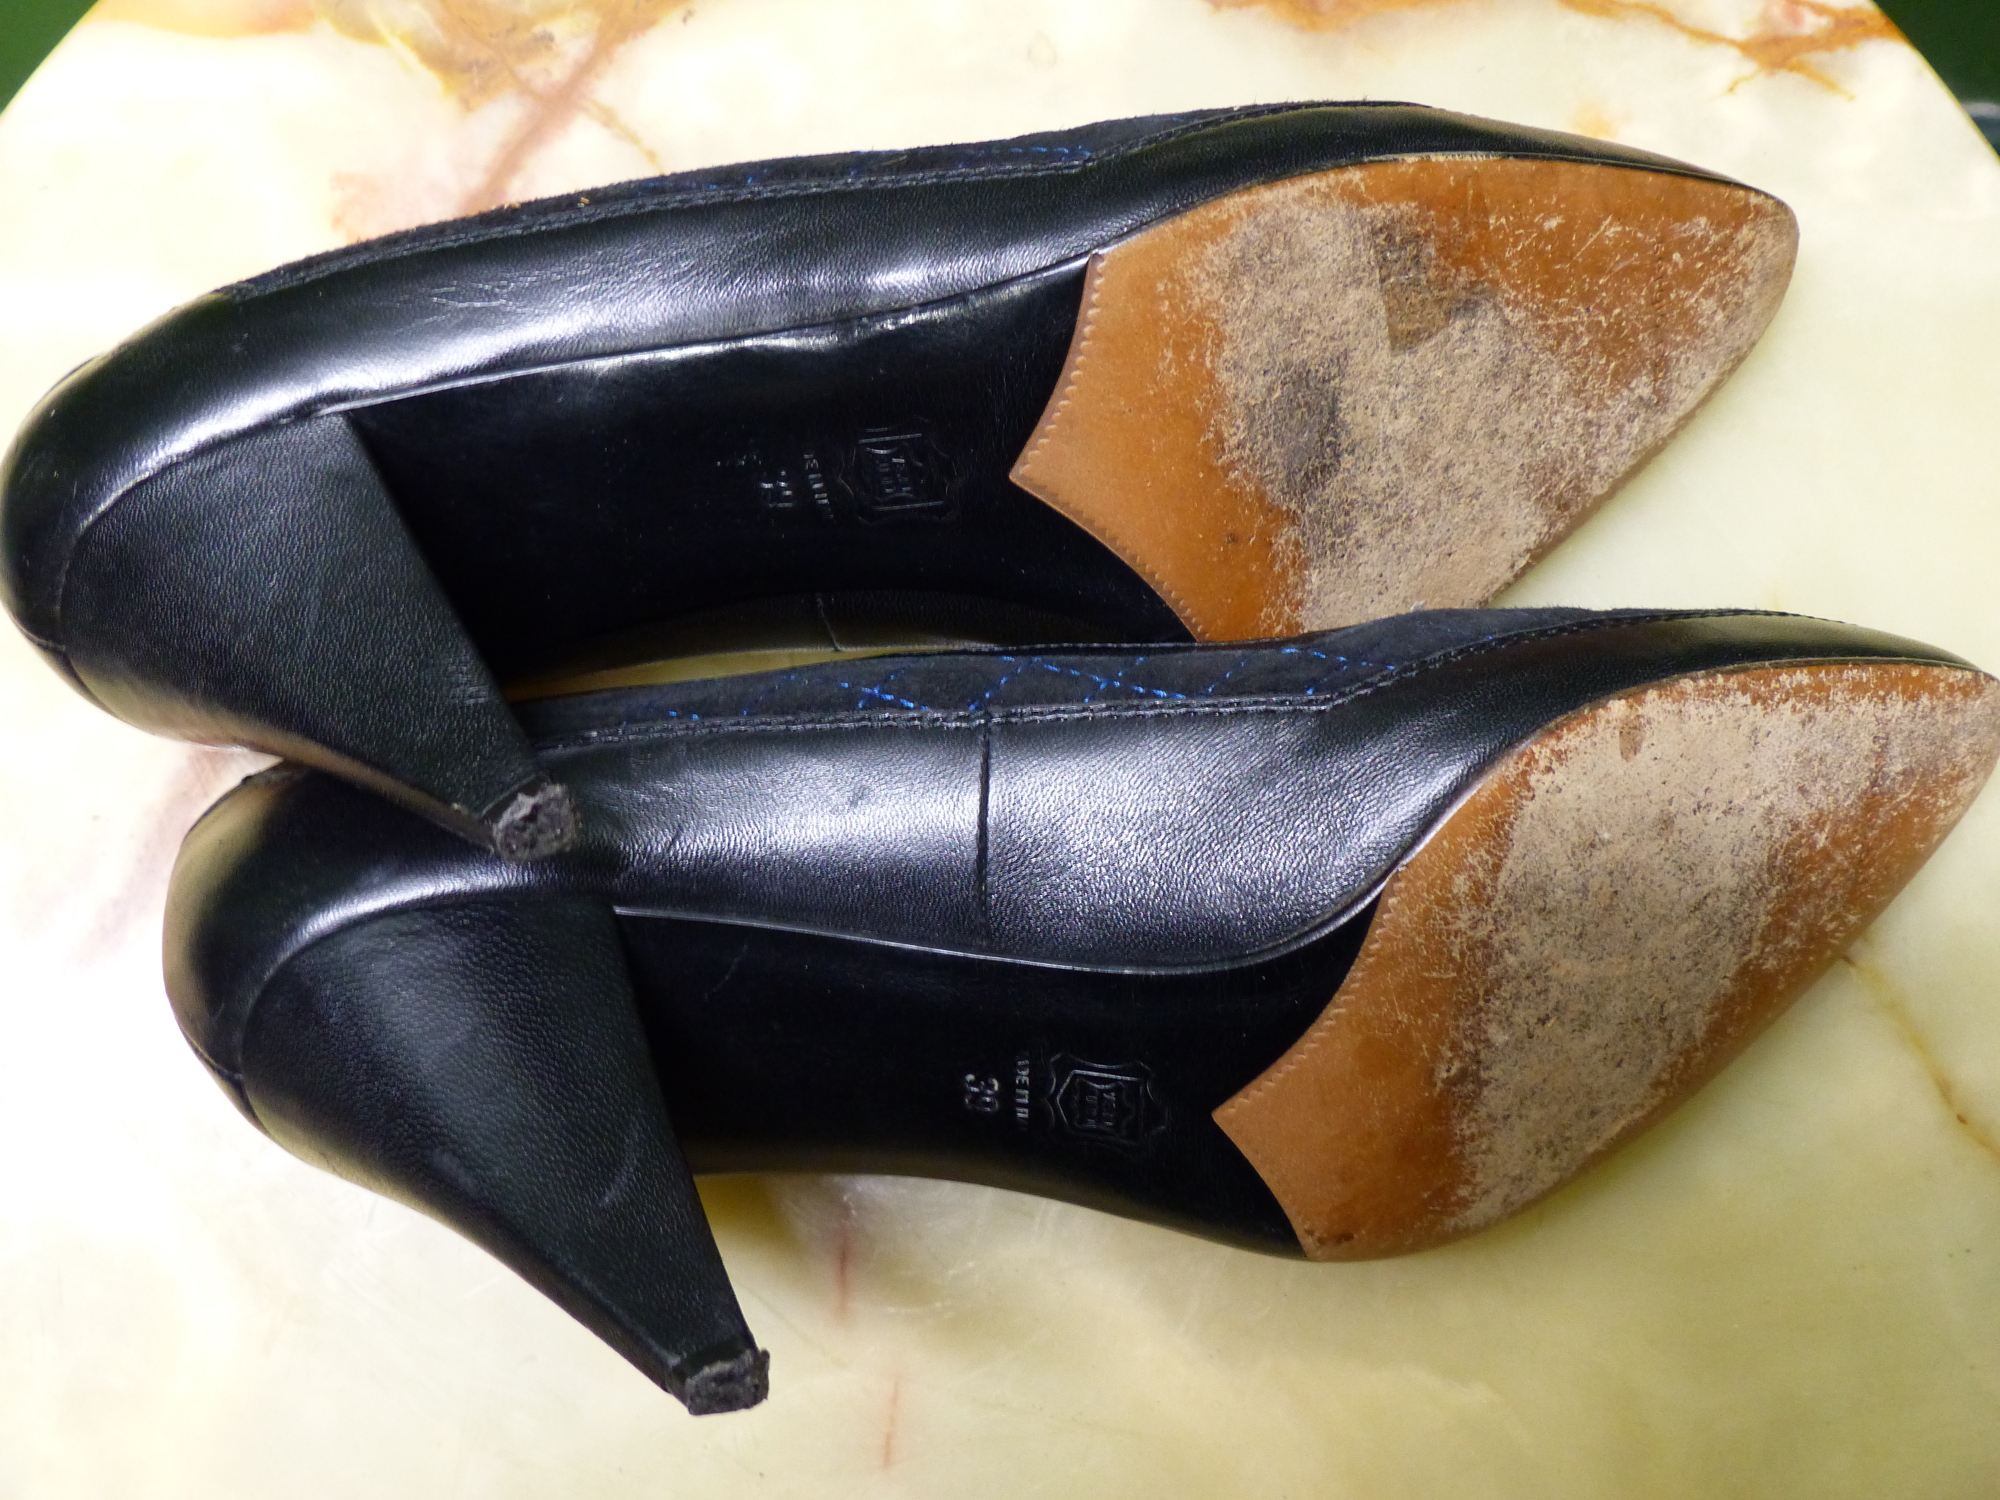 SHOES. GIANNI VERSACE ITALIAN BLACK WITH NAVY STITCH HEELS. EURO SIZE 39. HEEL HEIGHT 8cm. - Image 5 of 8